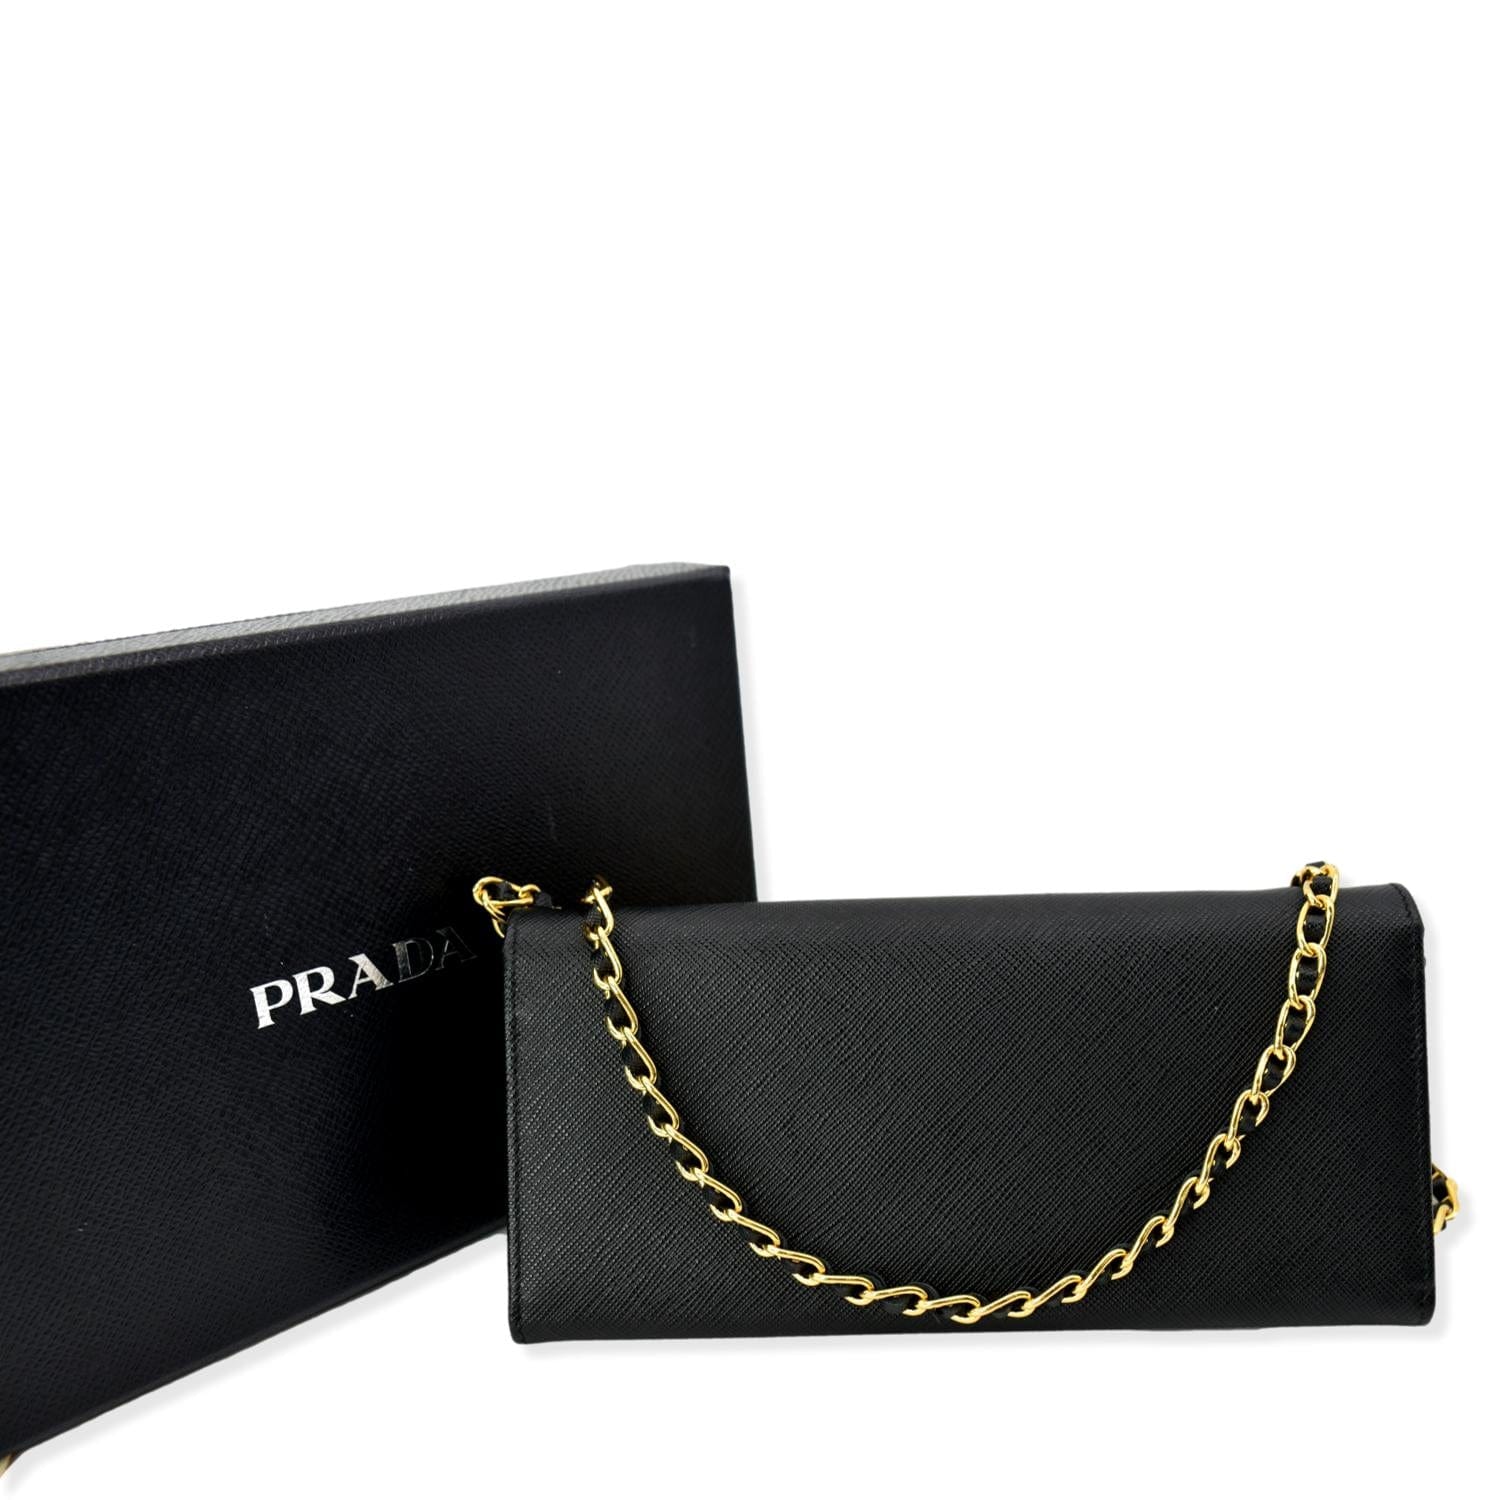 Prada wallet😻💯👌 Available now @pvcamboscollections